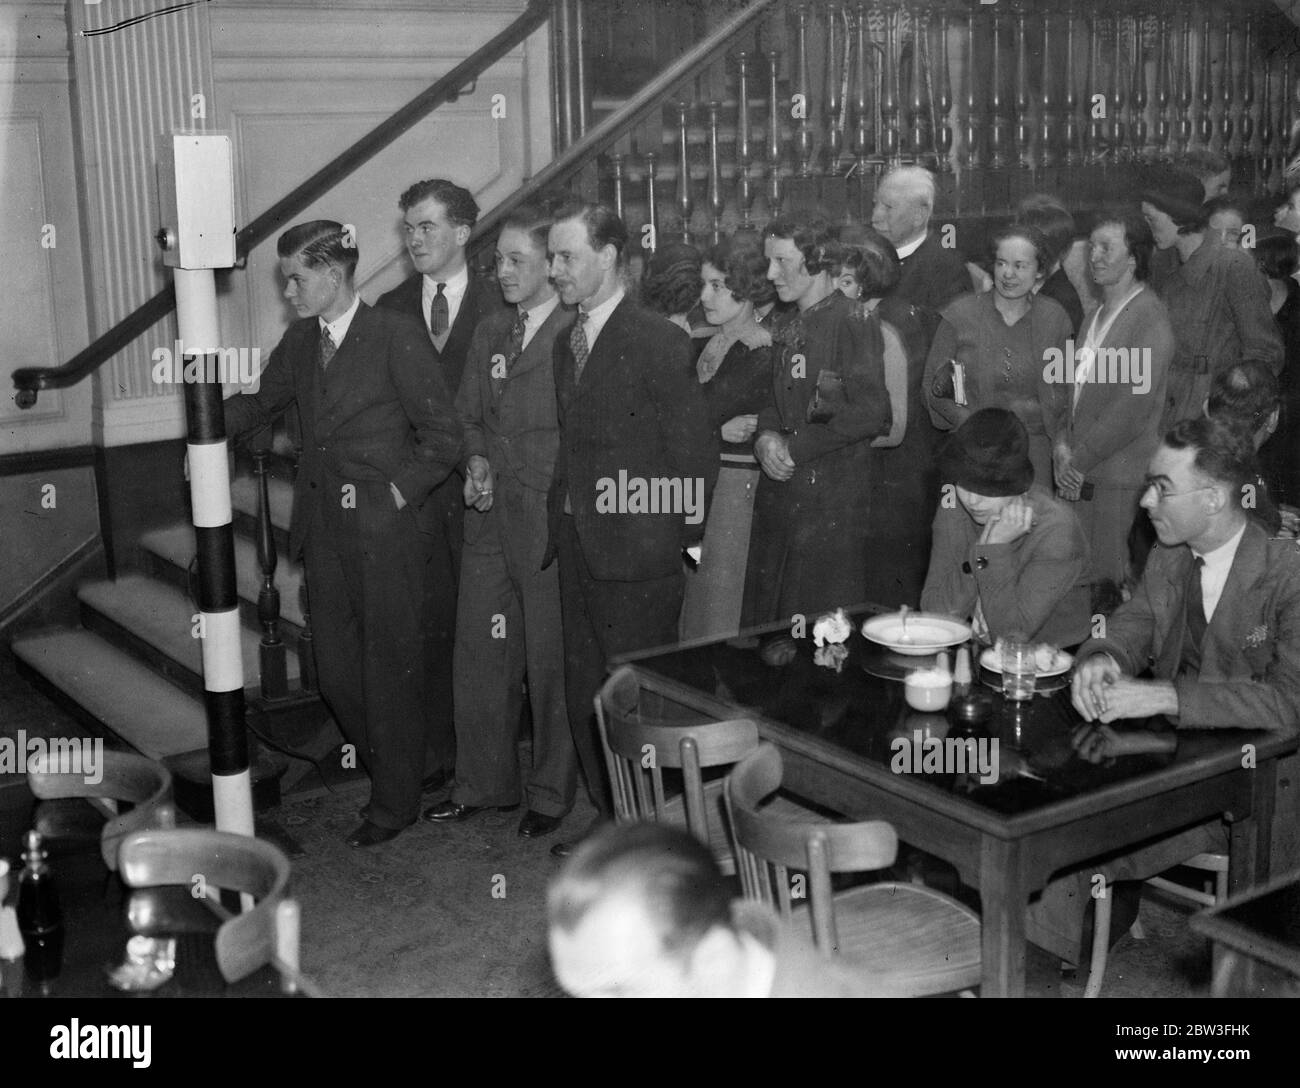 Traffic lights control diners . Lunch hour crowds at Millbank restaurant eat to ' Stop ' and ' Go ' signals . 29 January 1935 Stock Photo